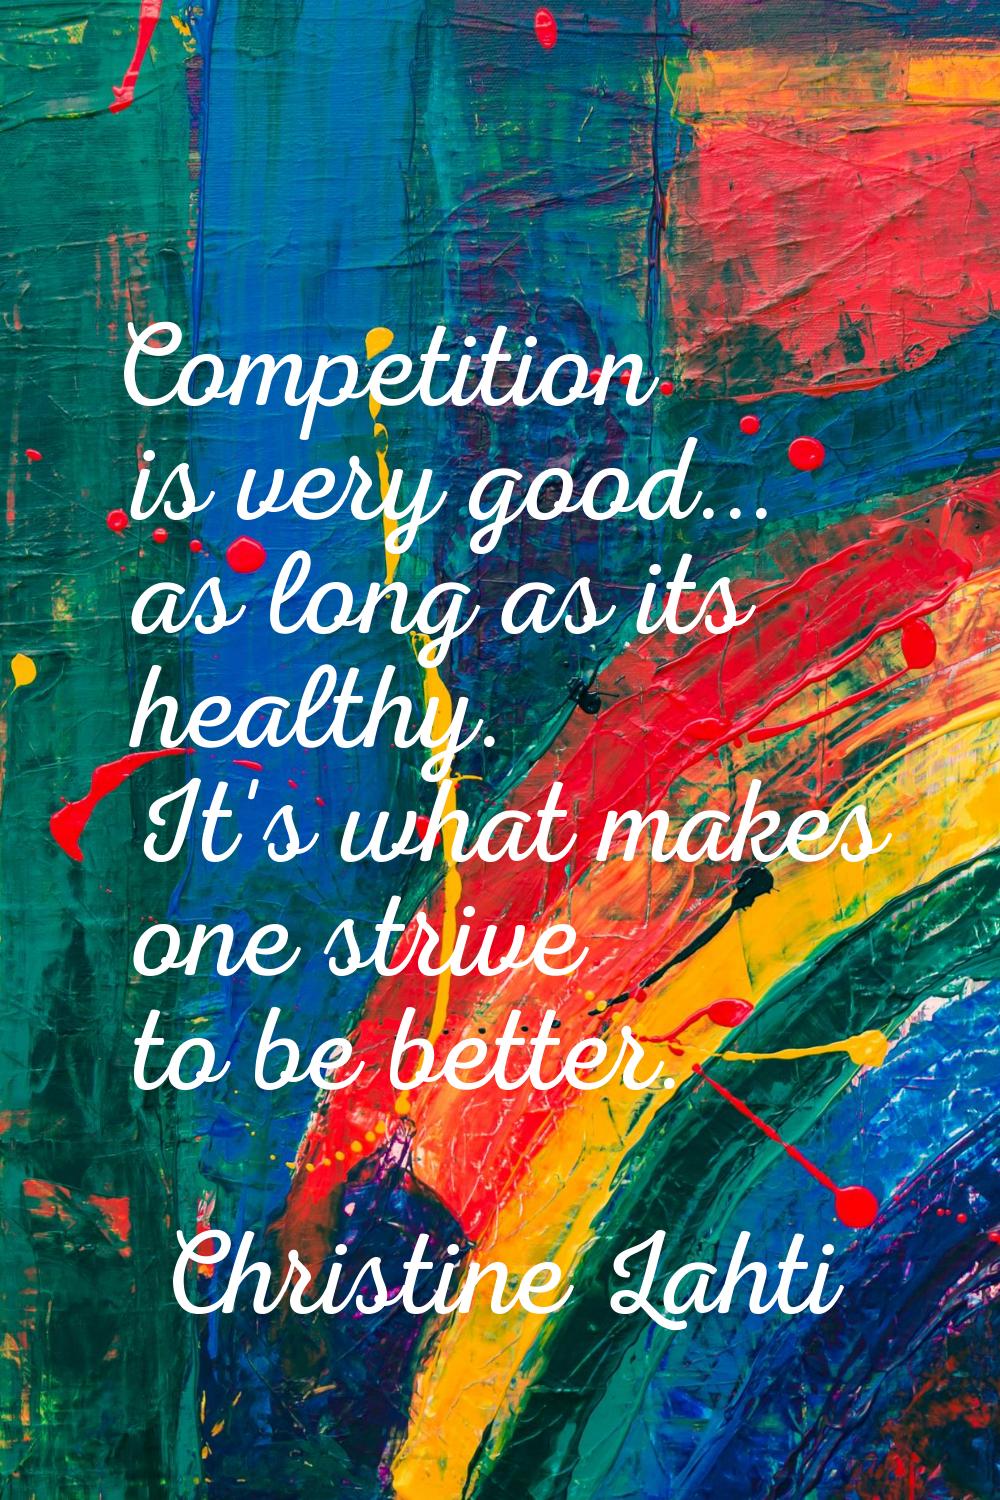 Competition is very good... as long as its healthy. It's what makes one strive to be better.